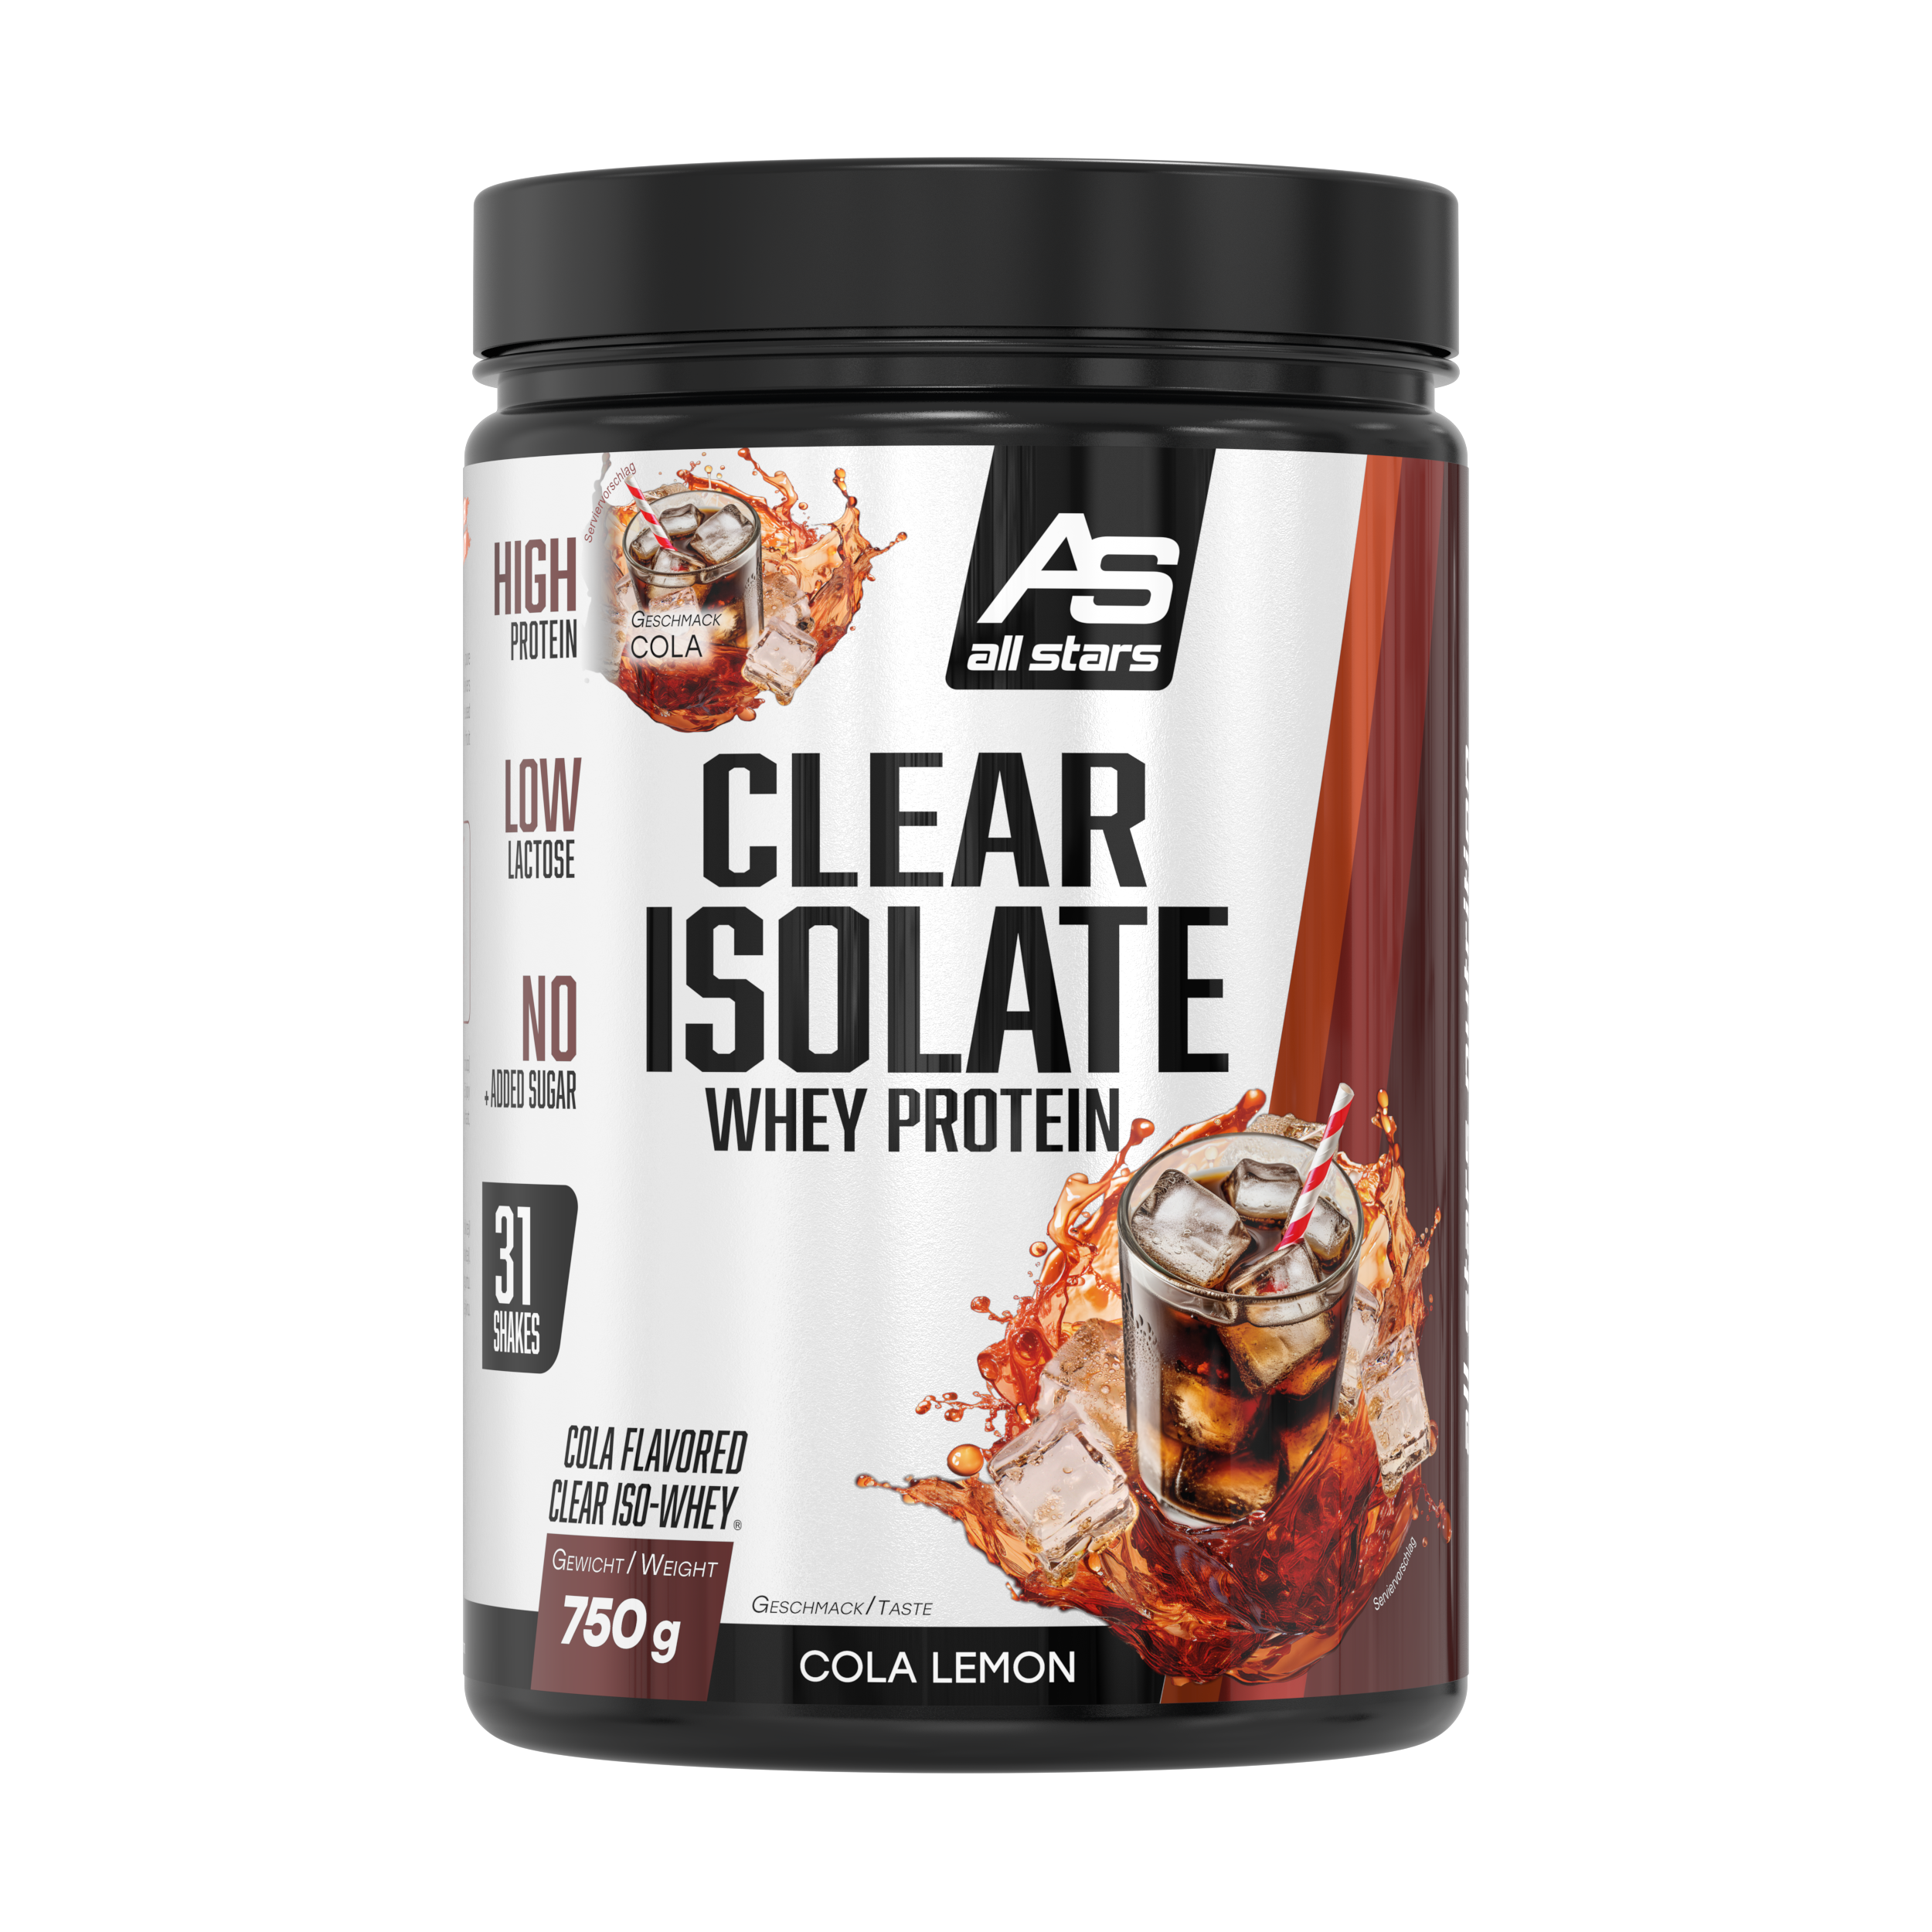 ALL STARS Clear Isolate Whey Protein 